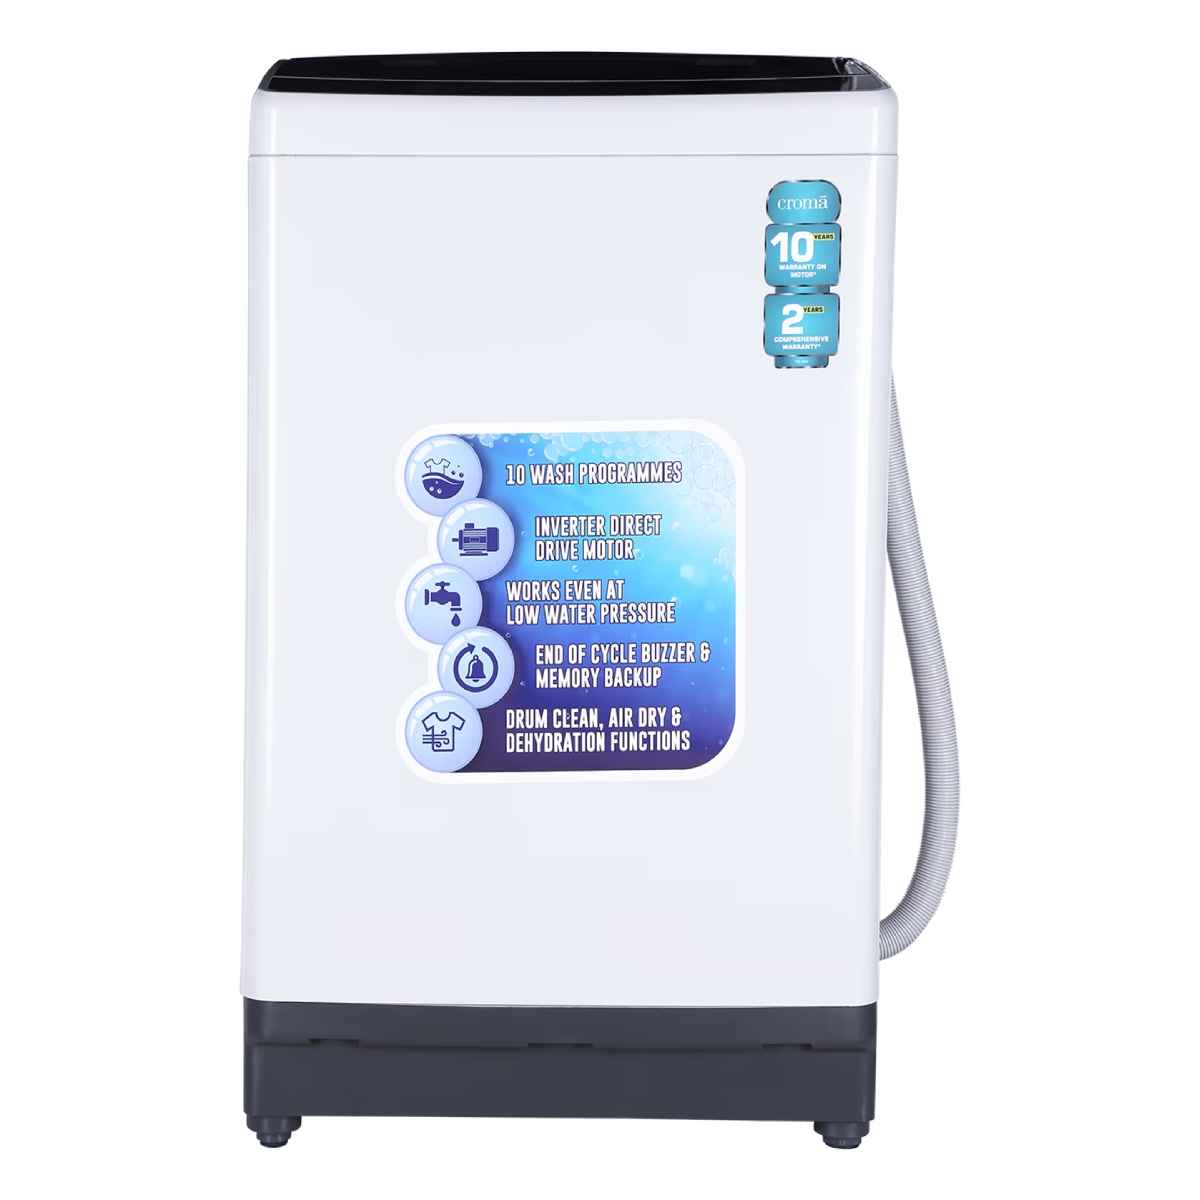 Croma 8 Kg Fully Automatic Top Load Washing Machine (CRAW1502)